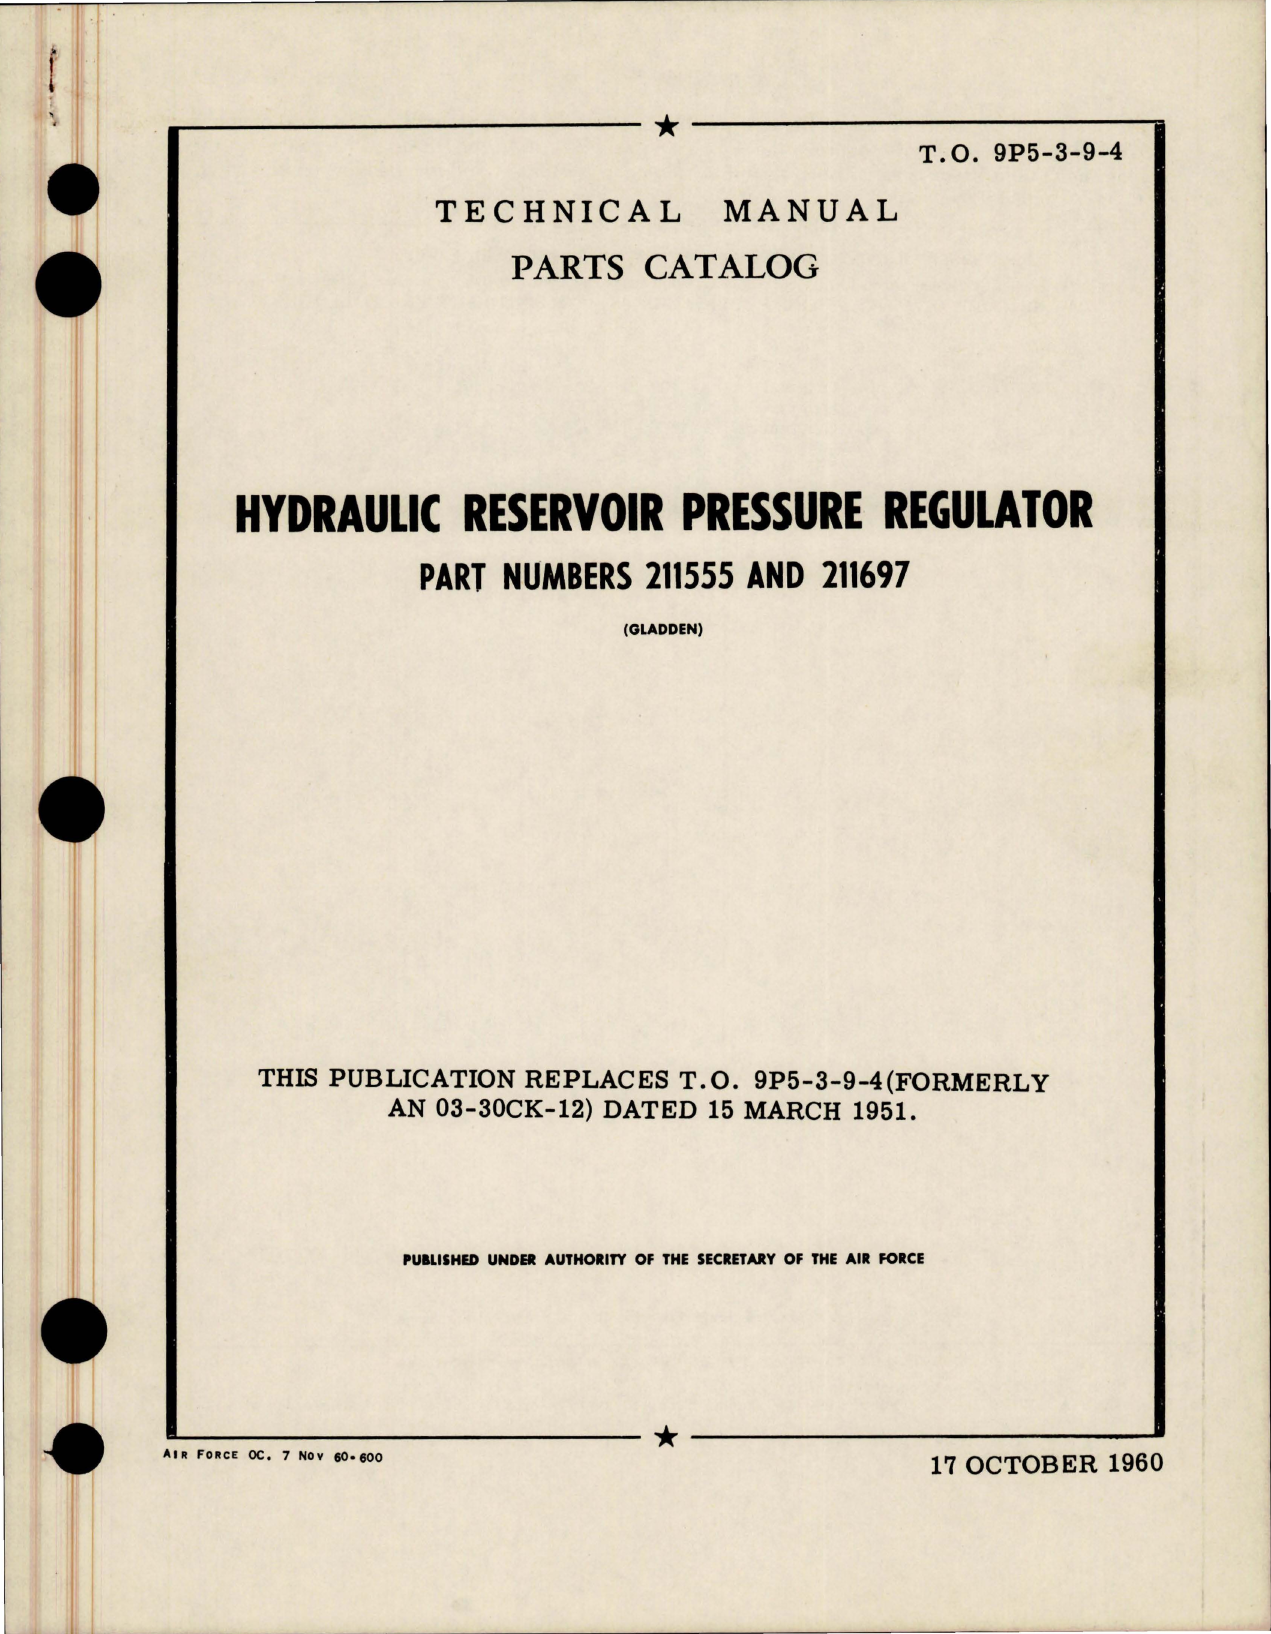 Sample page 1 from AirCorps Library document: Parts Catalog for Hydraulic Reservoir Pressure Regulator - Parts 211555, 211697